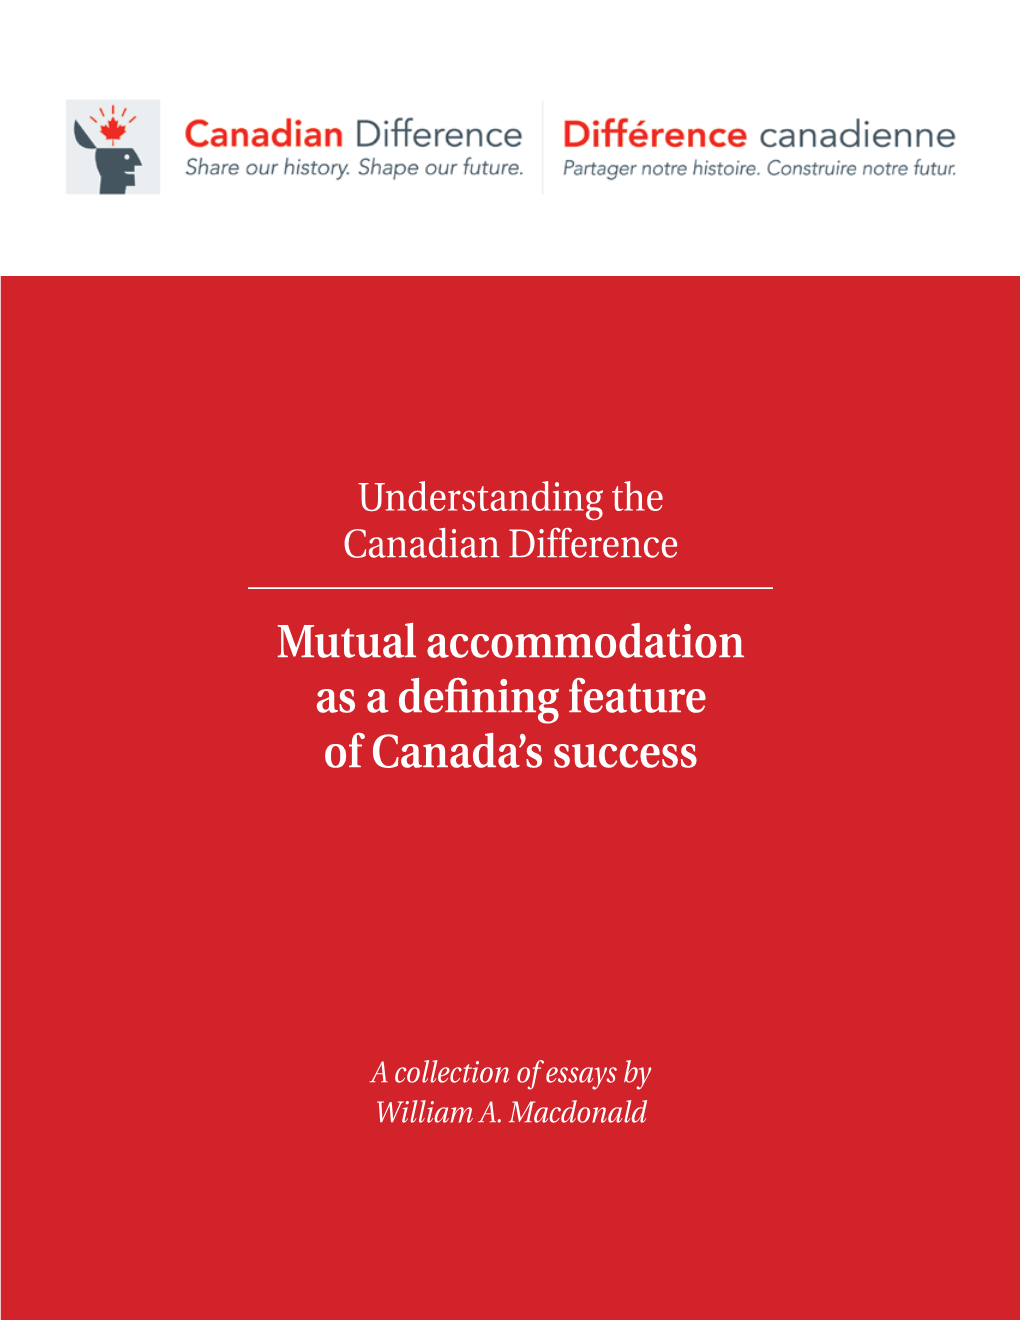 Mutual Accommodation As a Defining Feature of Canada's Success